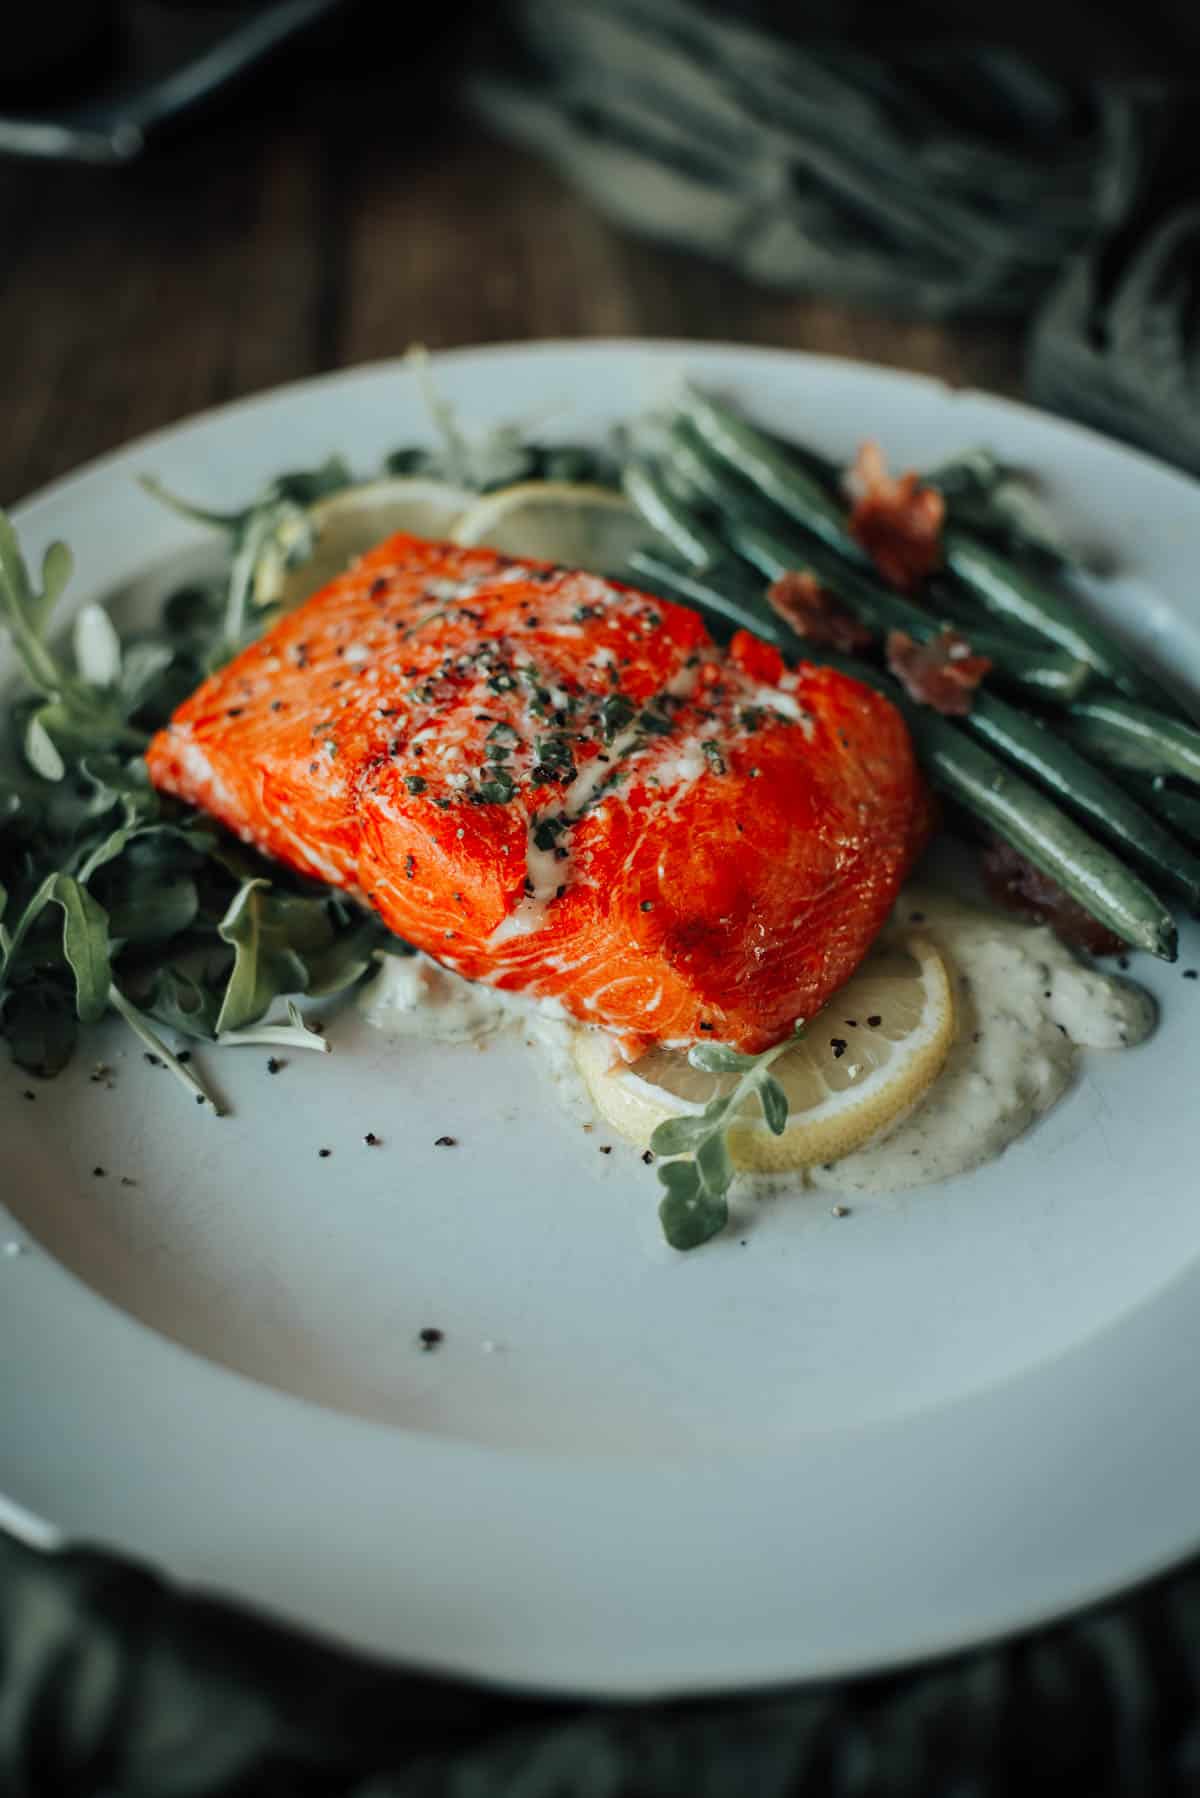 A plated smoked salmon fillet garnished with herbs, served with green beans, sliced lemon, and a dollop of sauce on a white plate.